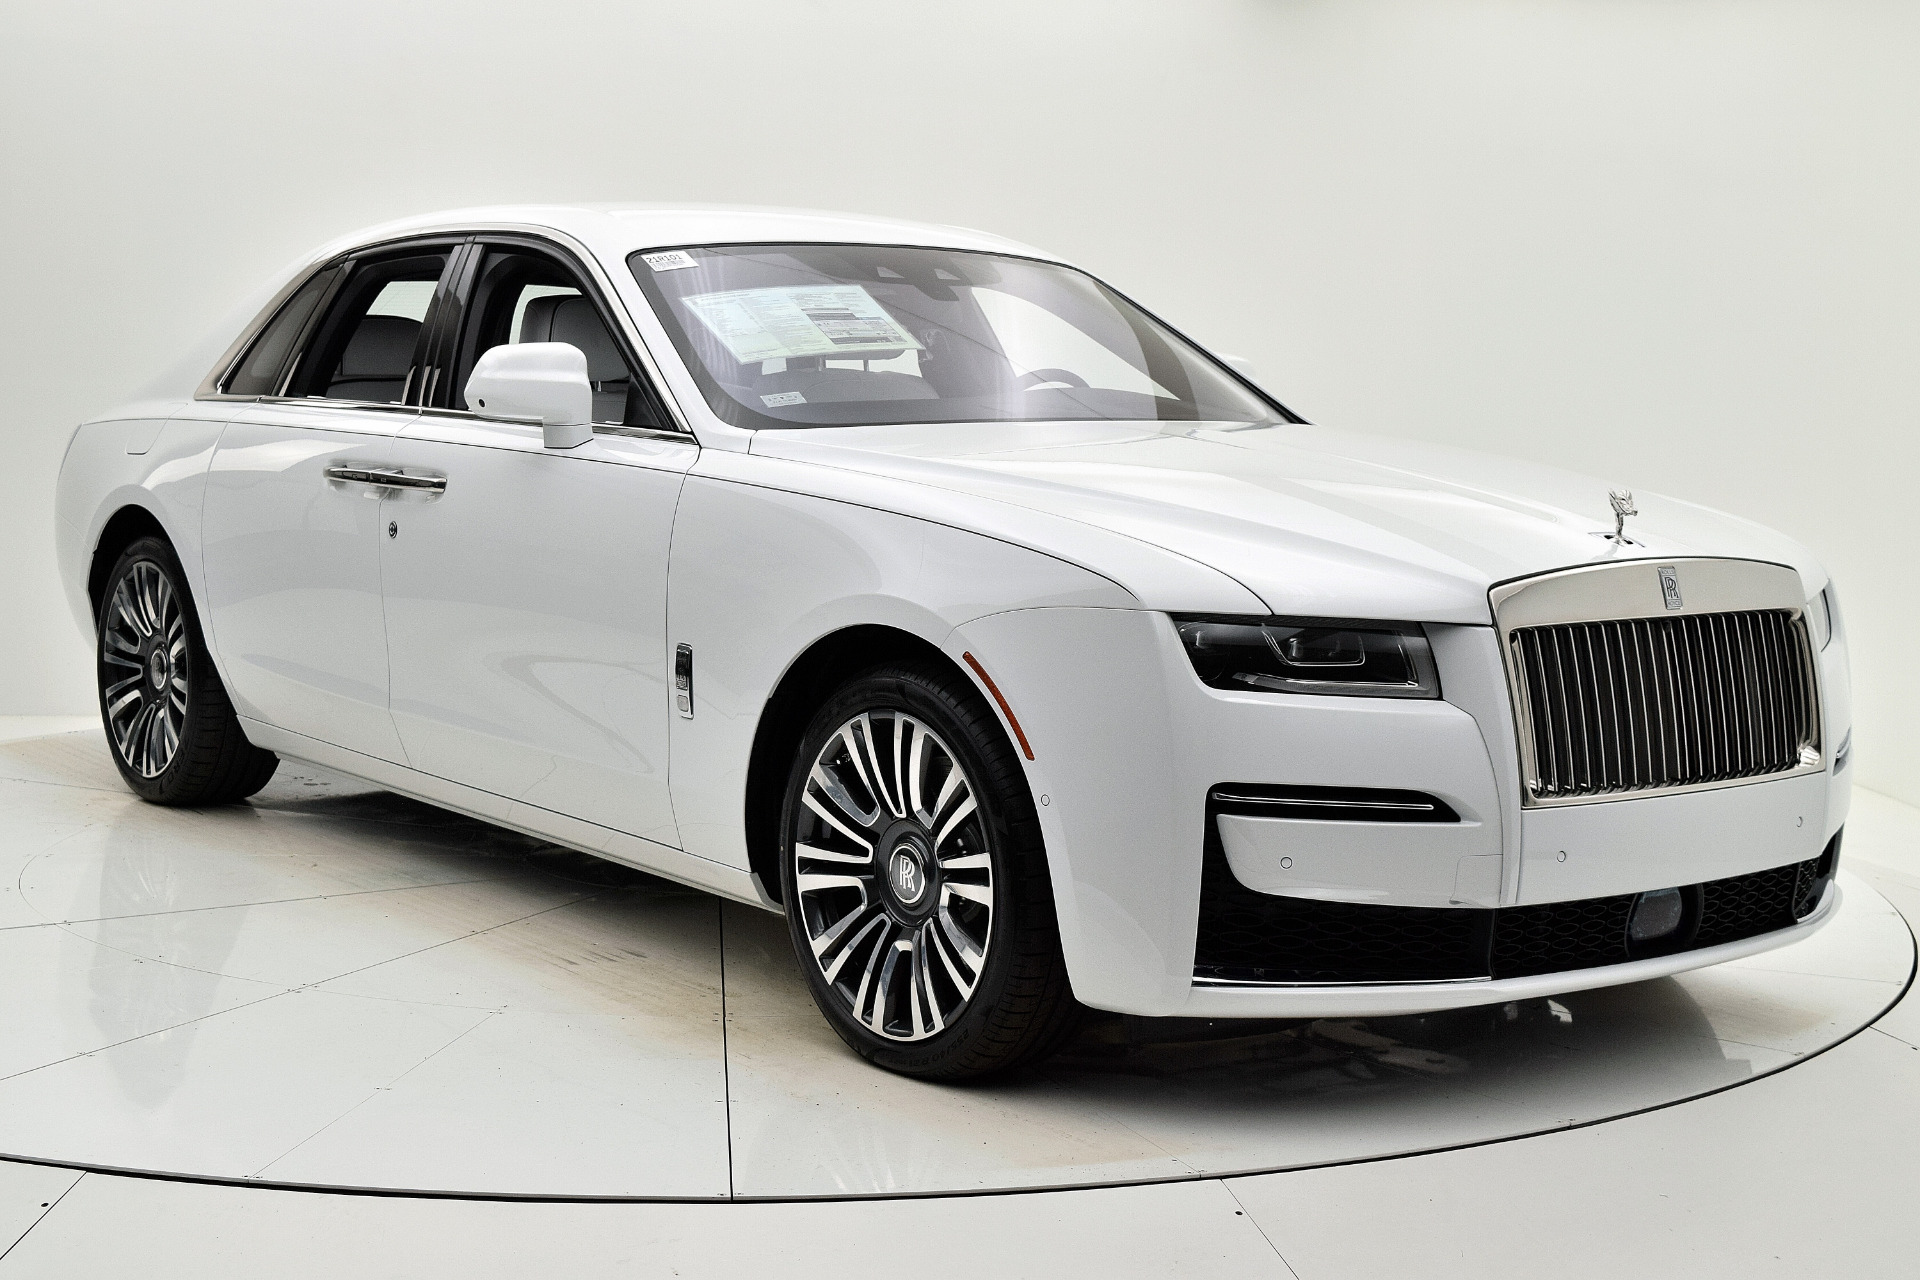 2021 Rolls Royce Ghost - Prices Start From $332,500 (Approx Rs 2.43 cr)